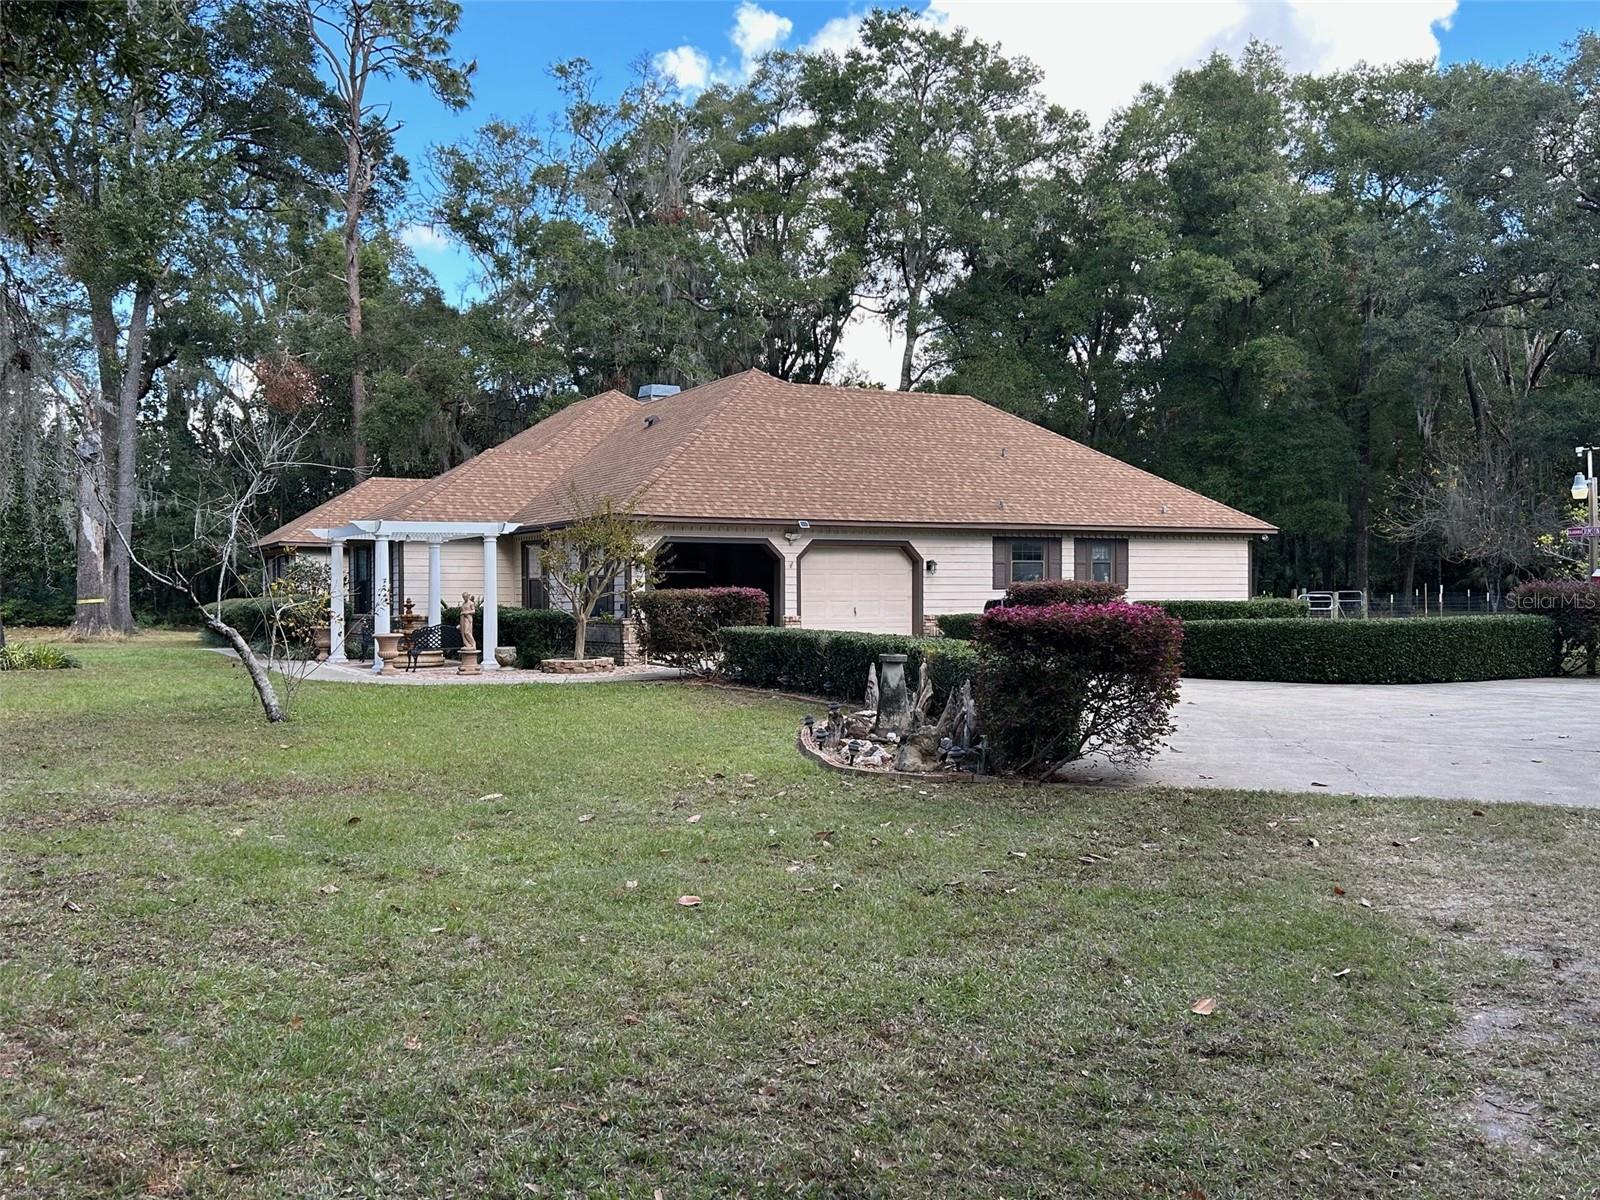 Details for 107 4th Street, CHIEFLAND, FL 32626